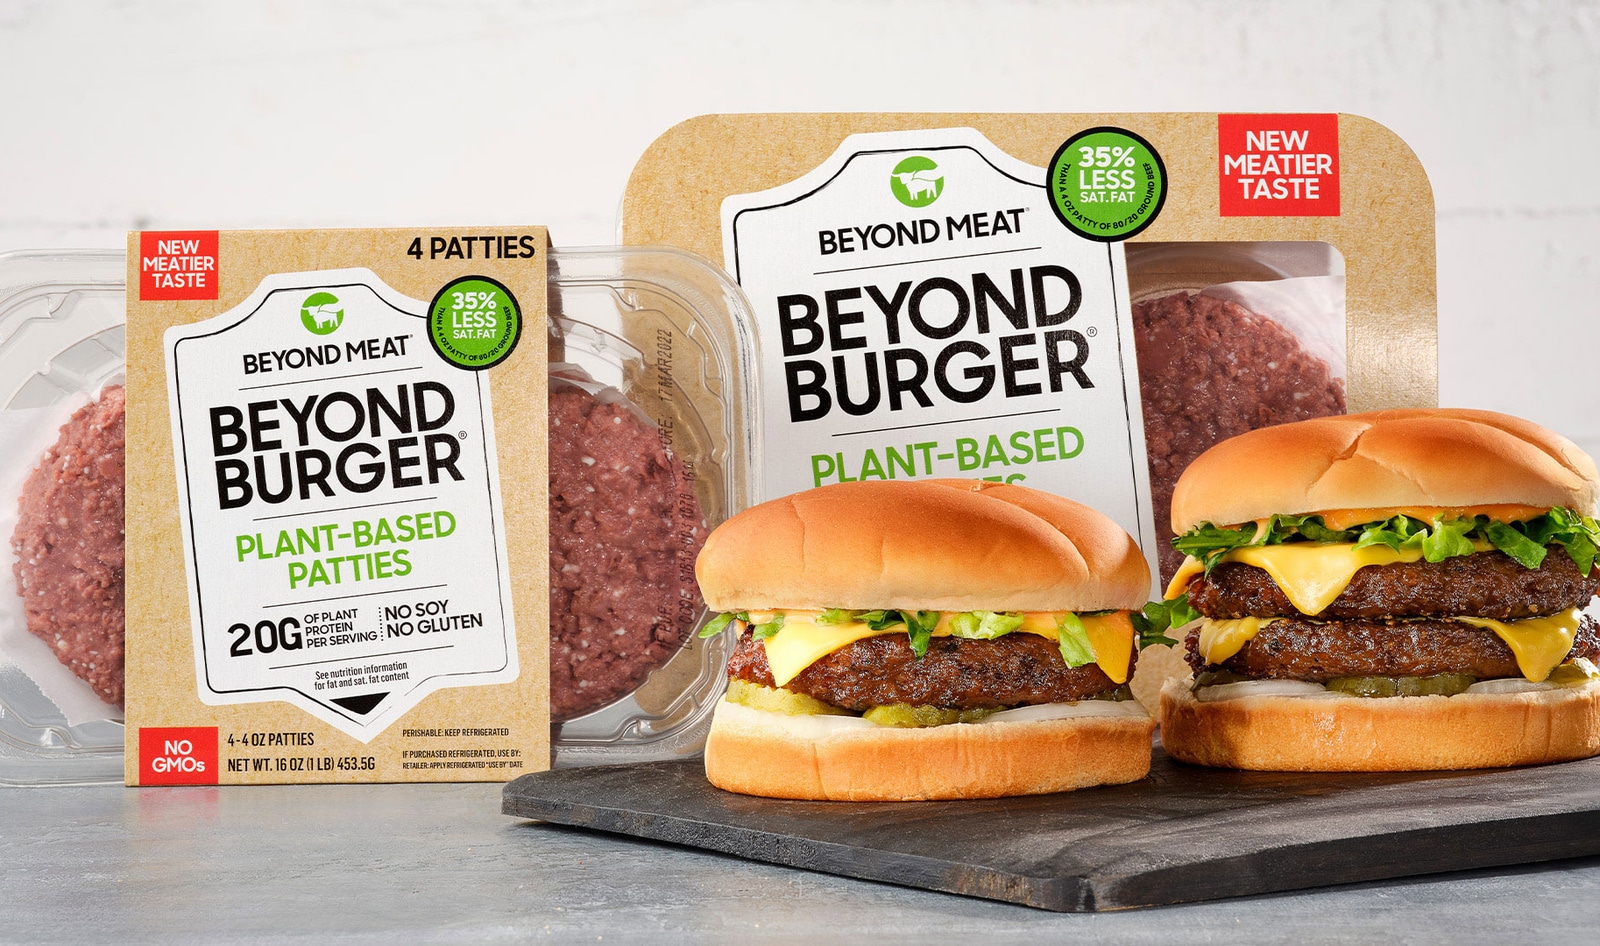 After Three Decades at Tyson, Two Meat Execs Jump Ship to Work for Beyond Meat&nbsp;